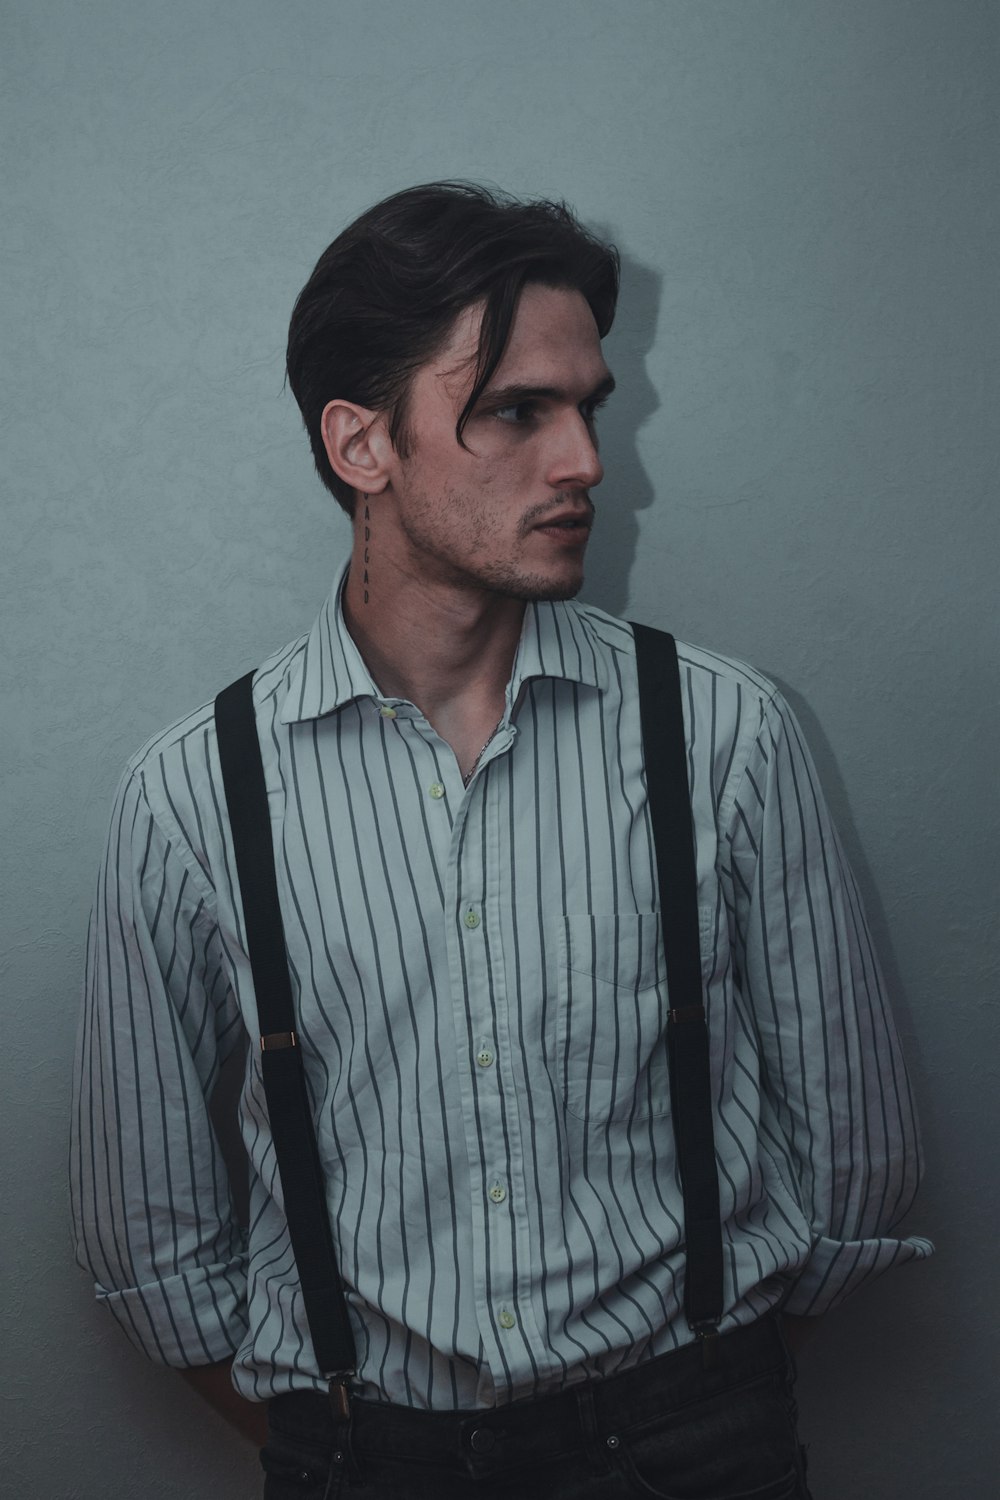 a man wearing suspenders and a striped shirt